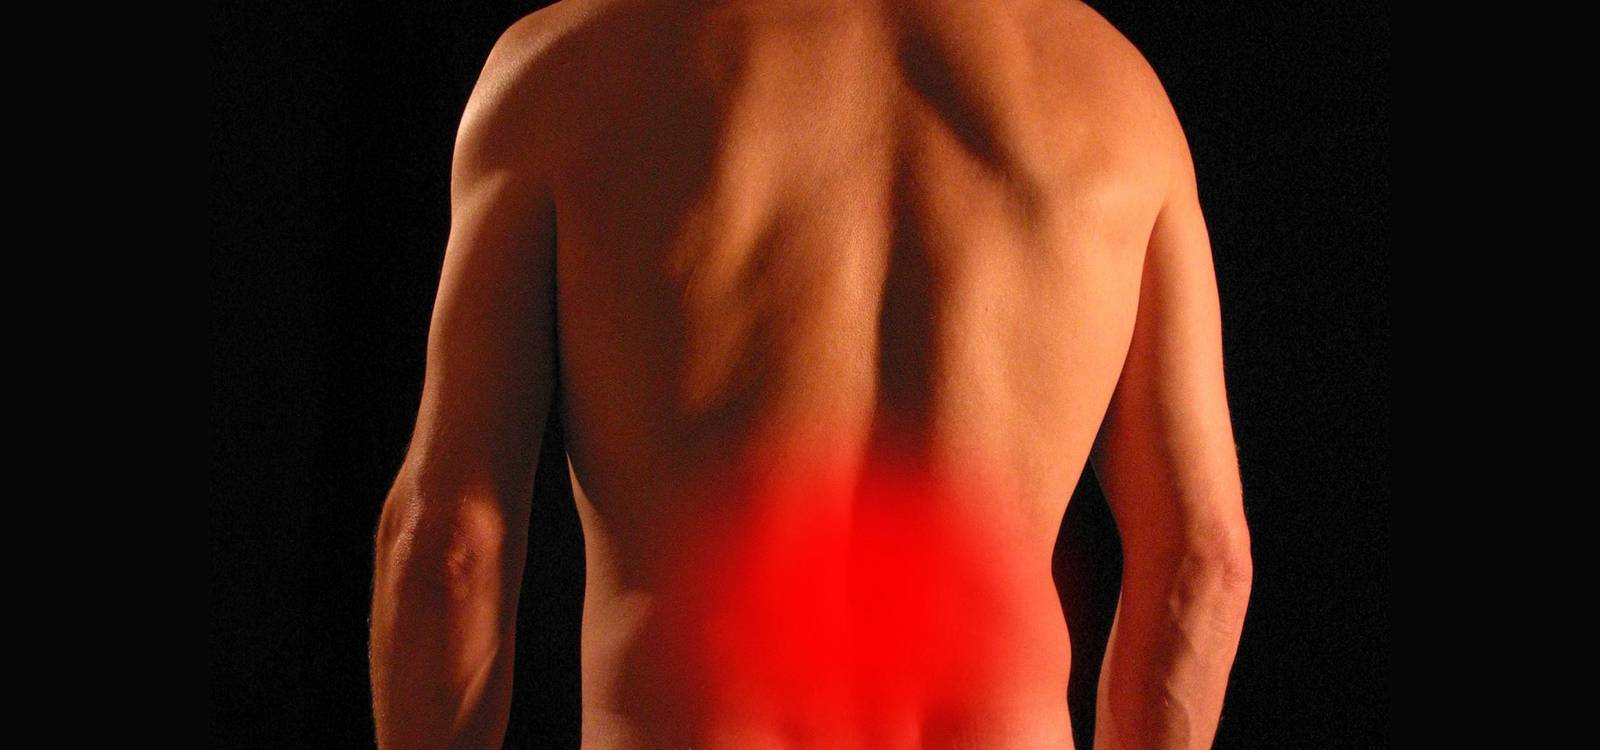 Back Pain/Sciatica at Tracey Miles Physio near Canterbury Kent